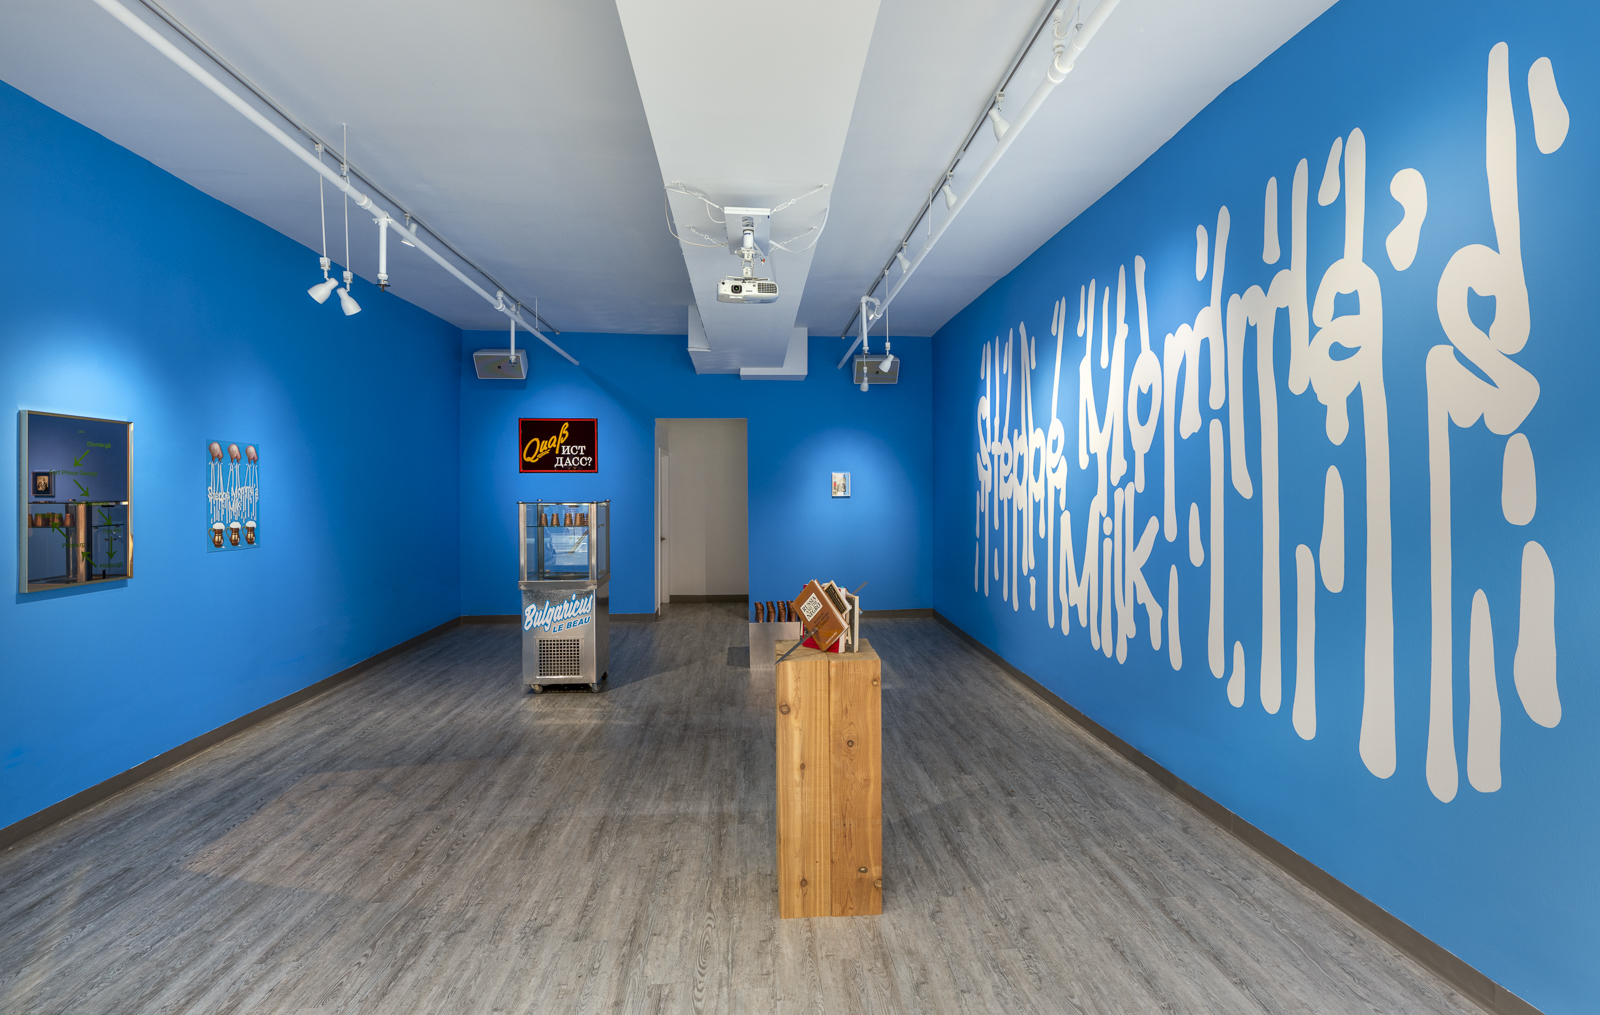 Blue walls in a gallery space with Steppe Mommas written on far right wall